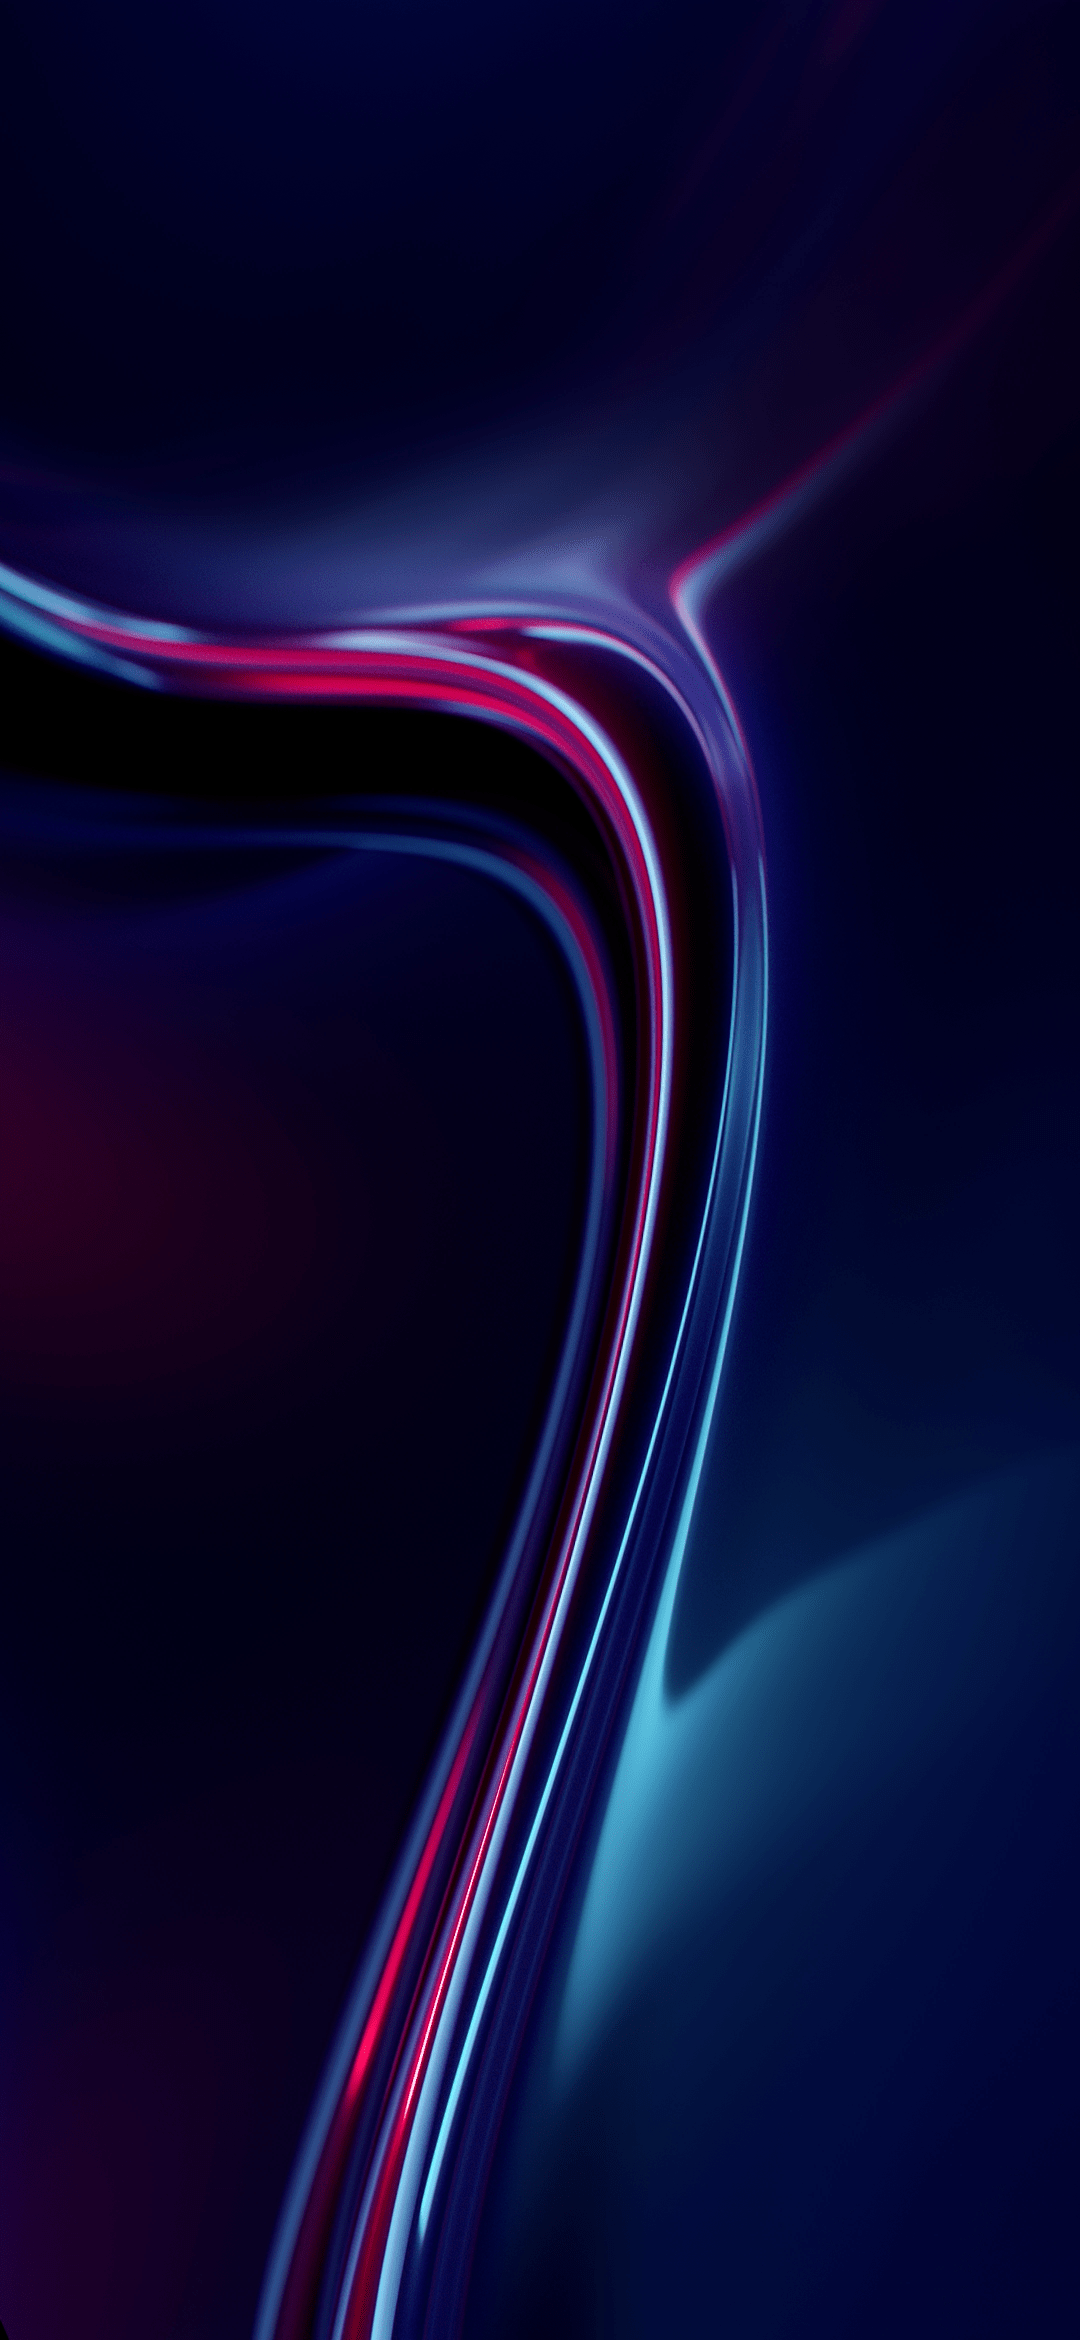 1080 X 2340 AMOLED Wallpapers - Top Free 1080 X 2340 AMOLED Backgrounds